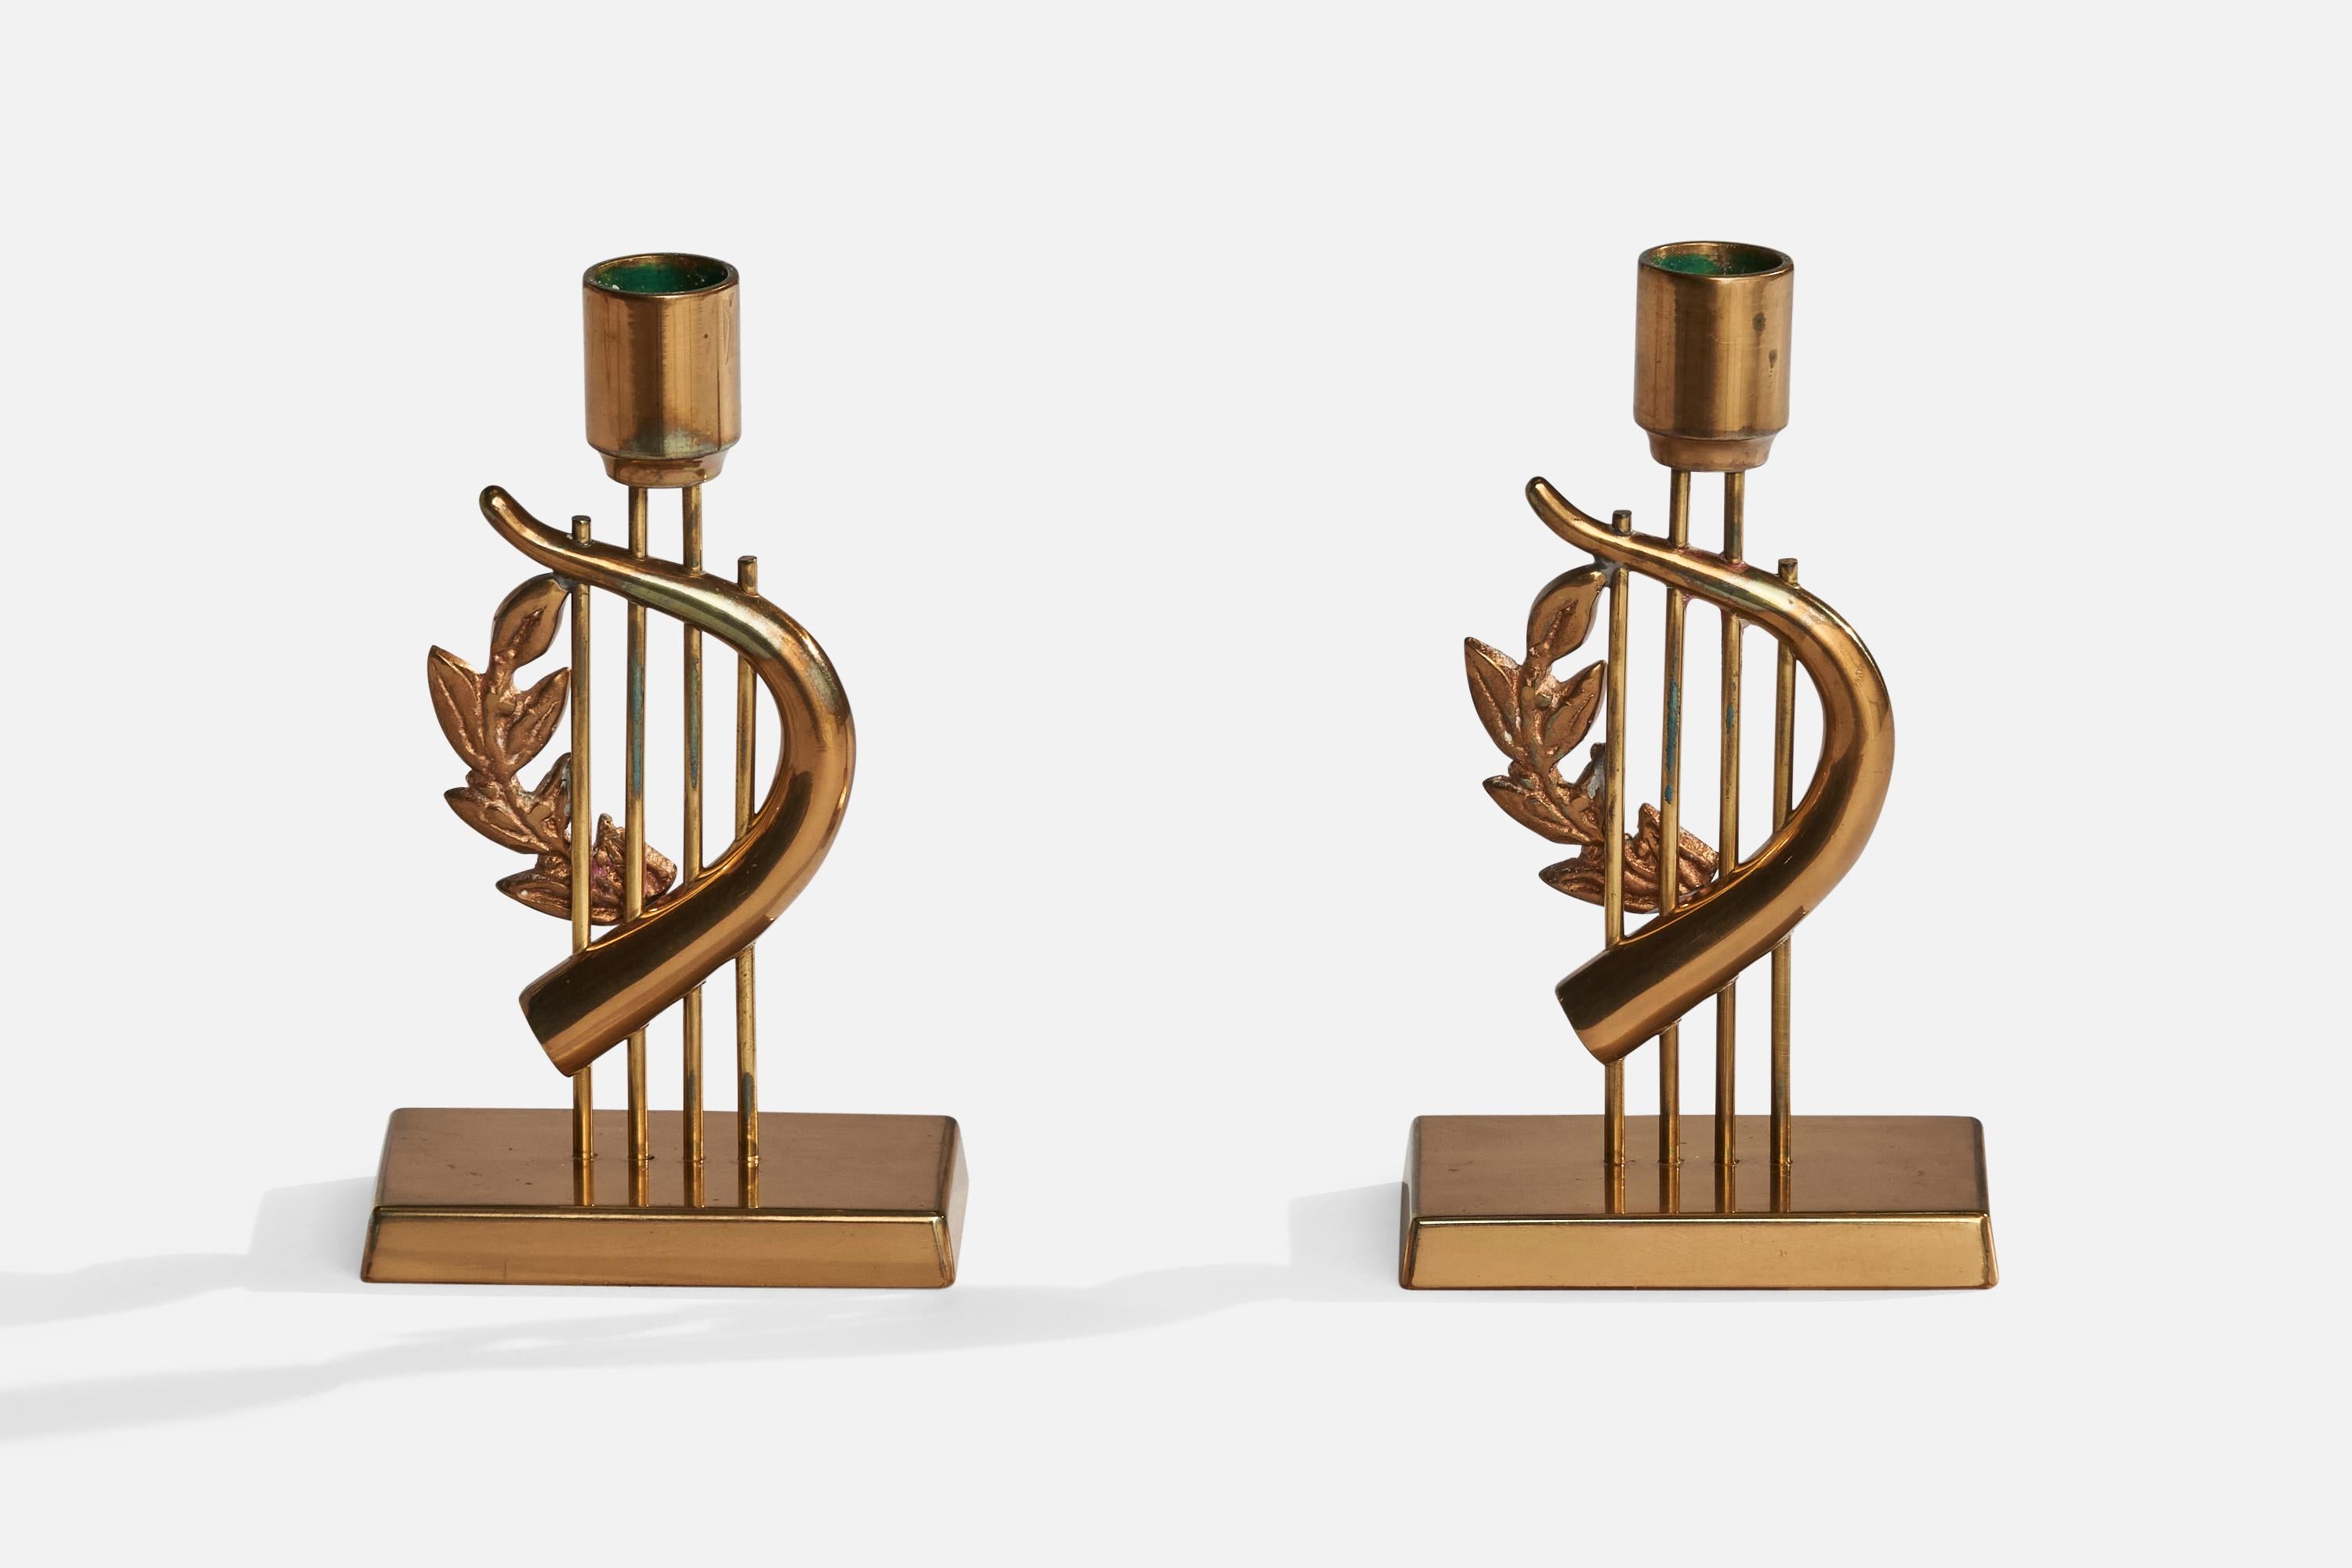 A pair of brass candlesticks designed and produced by G. Magnusson Design, Sweden, 1985.

Holds 0.7” diameter candles